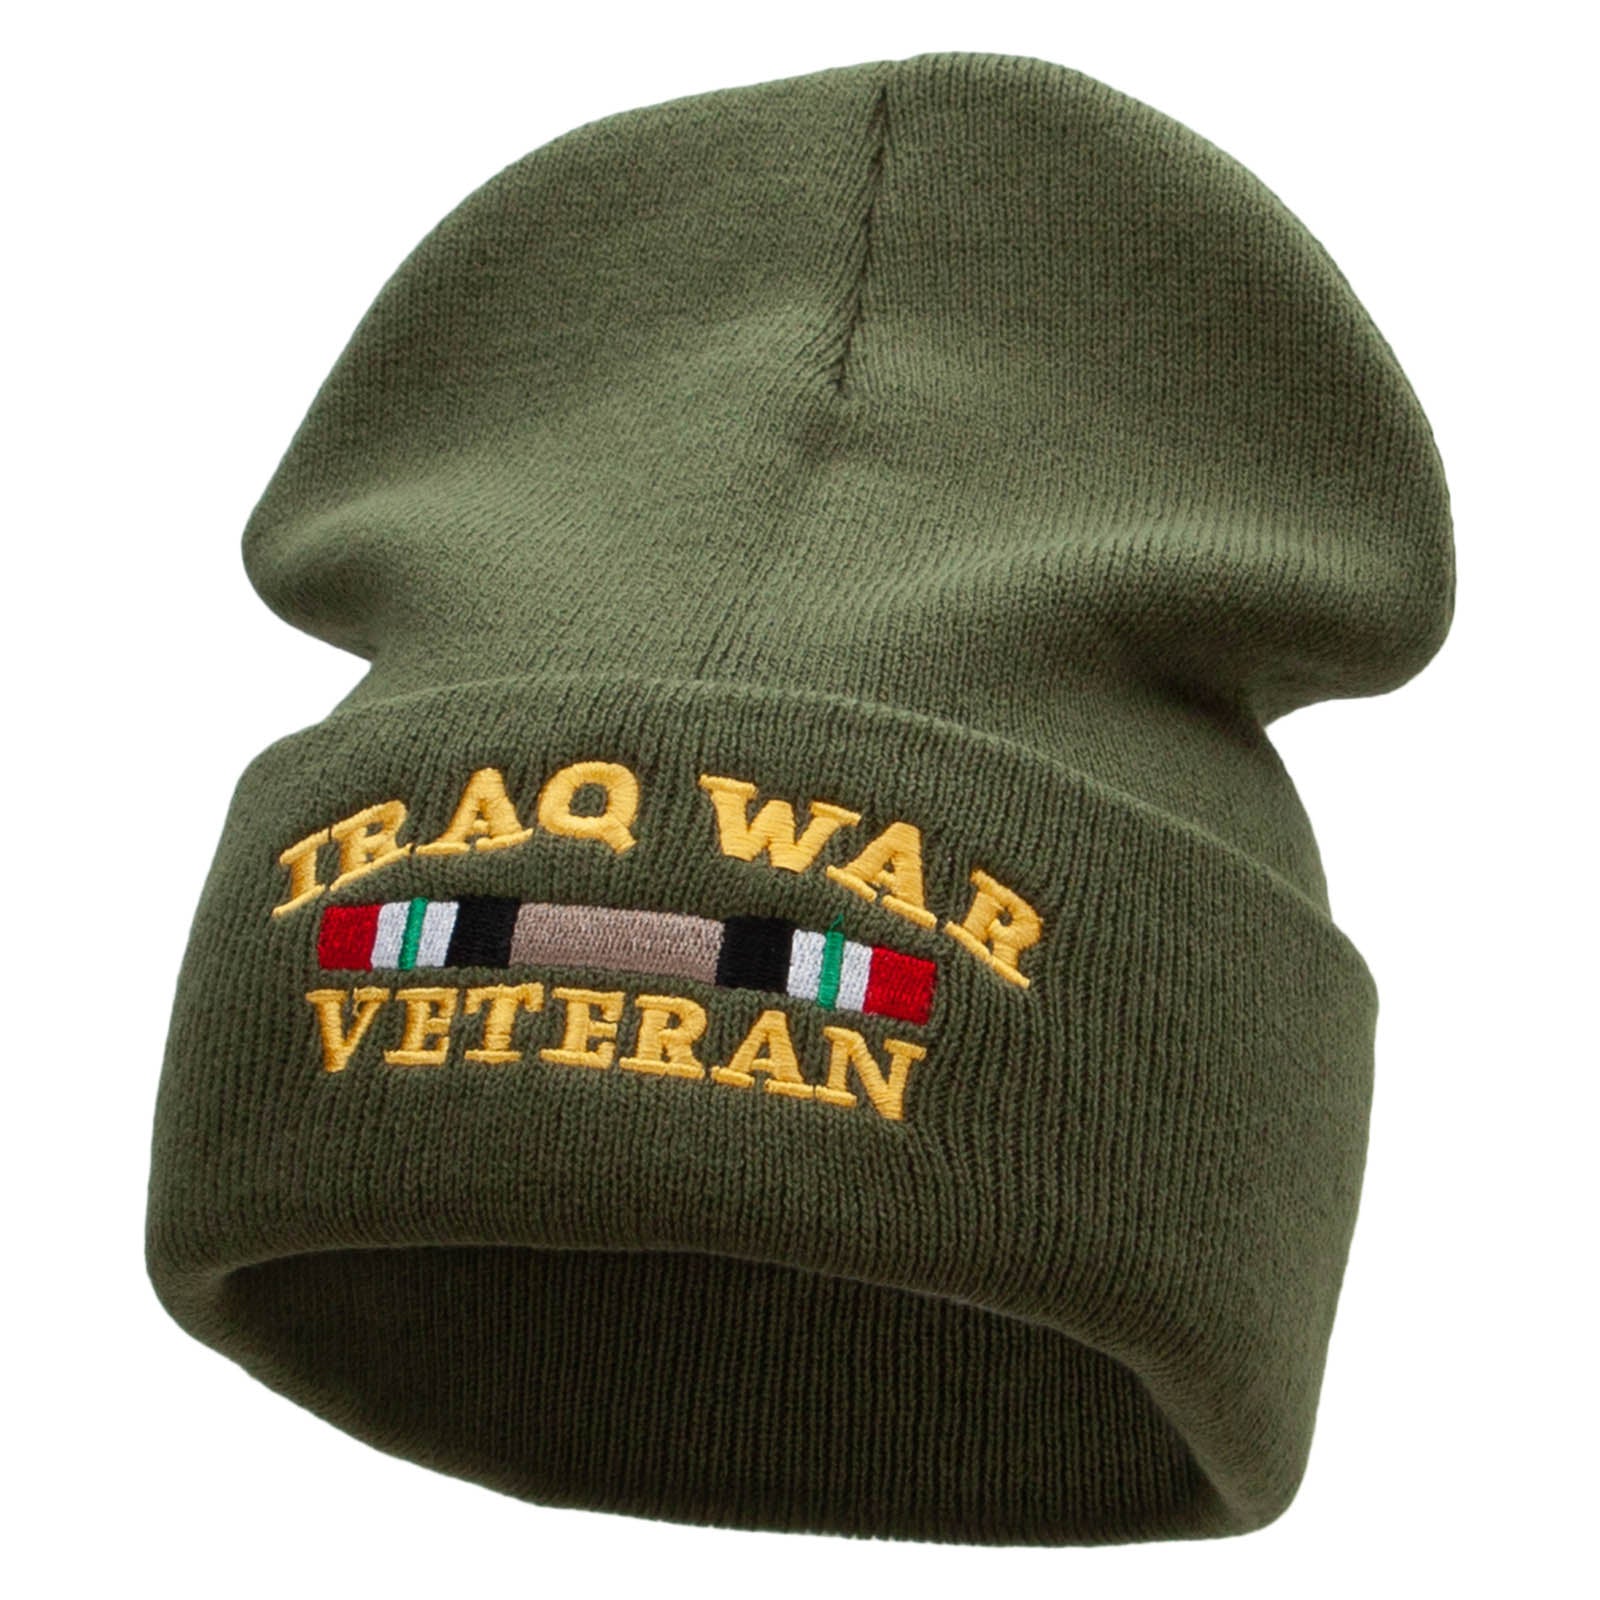 Iraq War Ribbon Embroidered 12 Inch Solid Knit Cuff Long Beanie Made in USA - Military Green OSFM